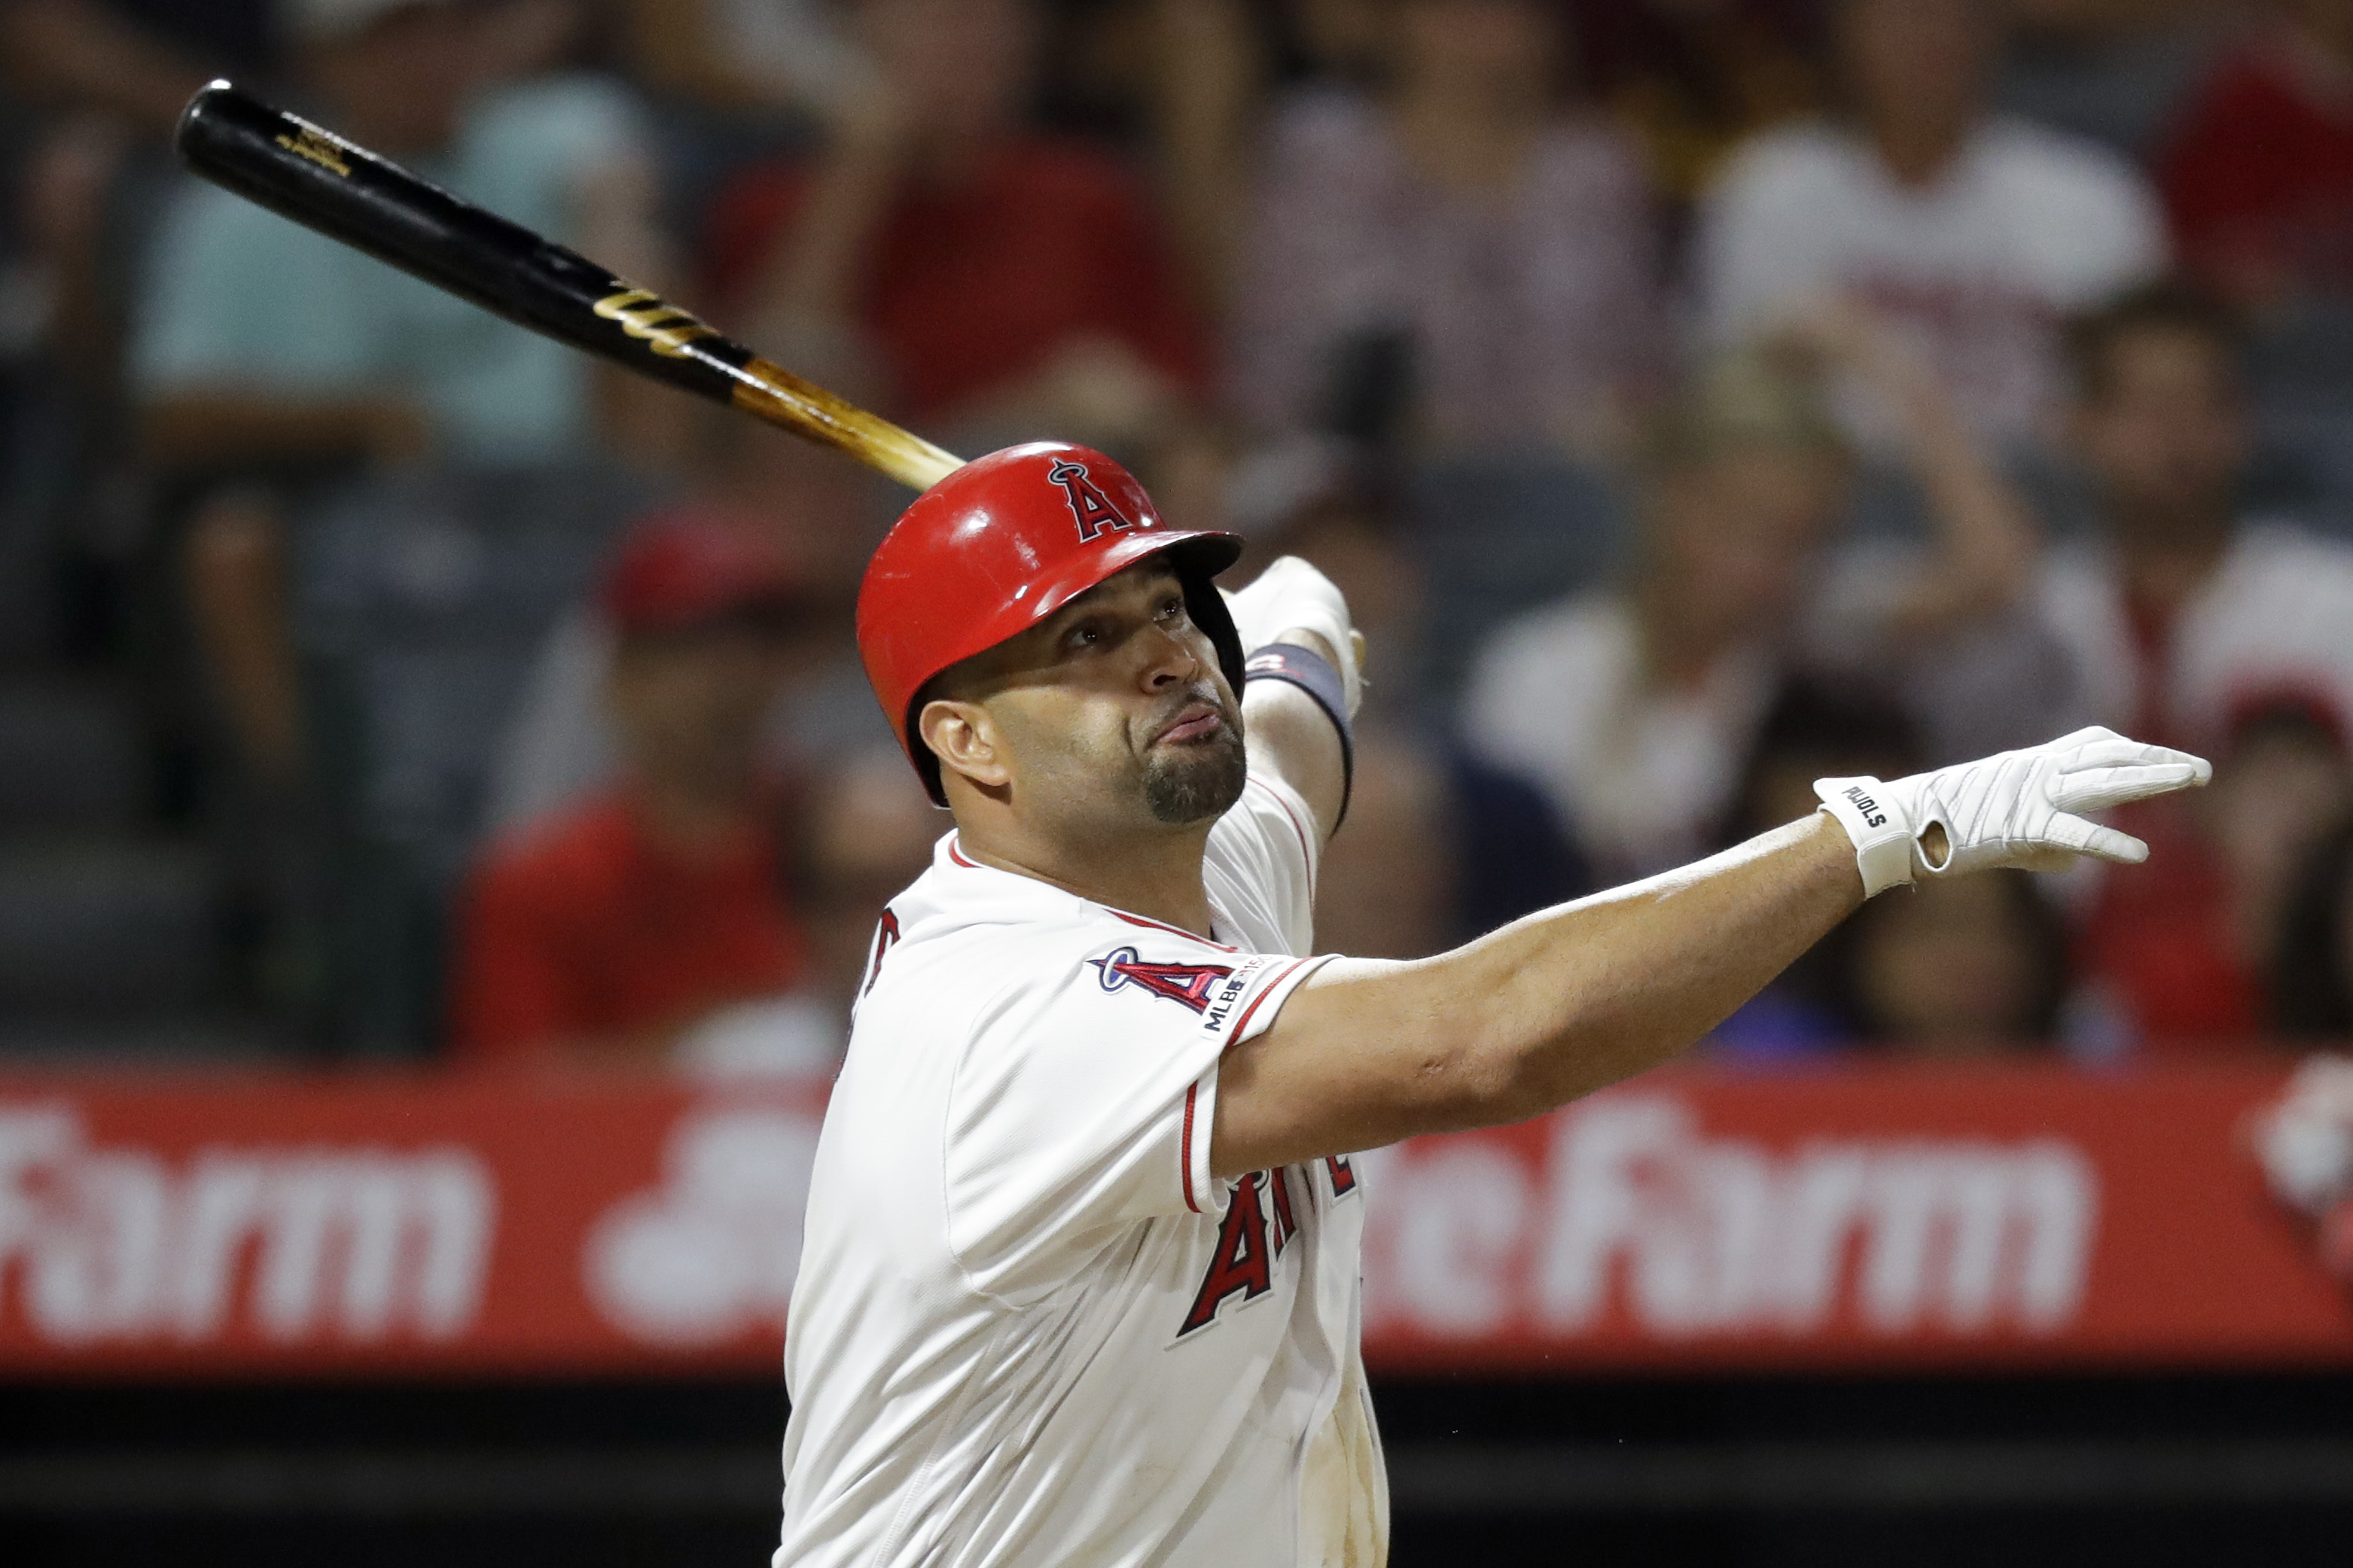 Pujols, Trout help Angels rally for 10-4 win over Red Sox